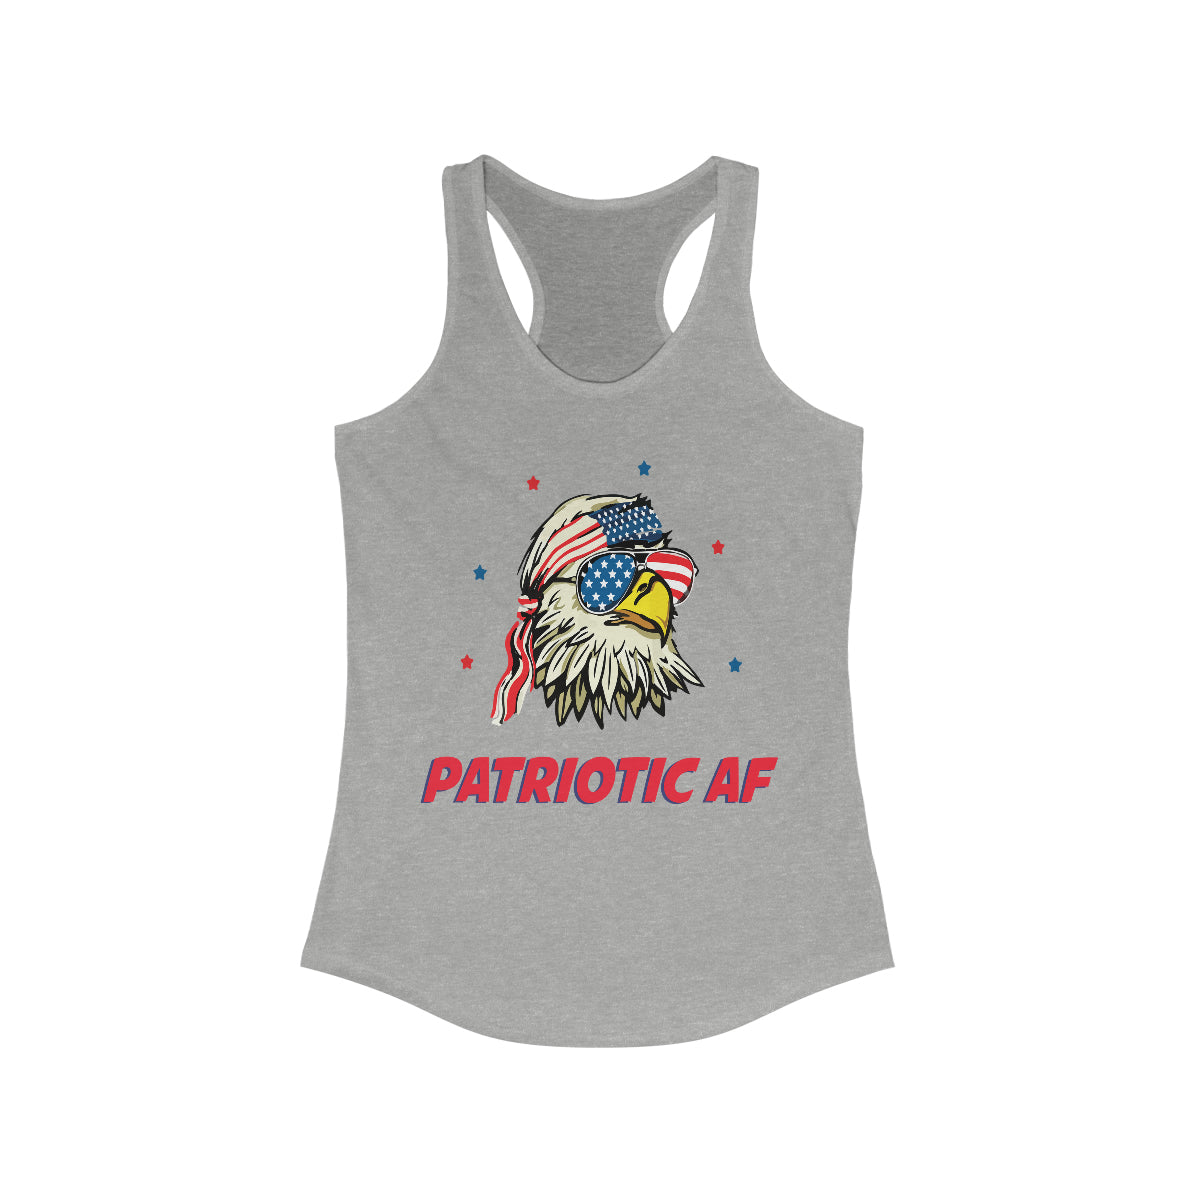 Patriotic AF with American Eagle | Women's Racerback Tank - Rise of The New Media